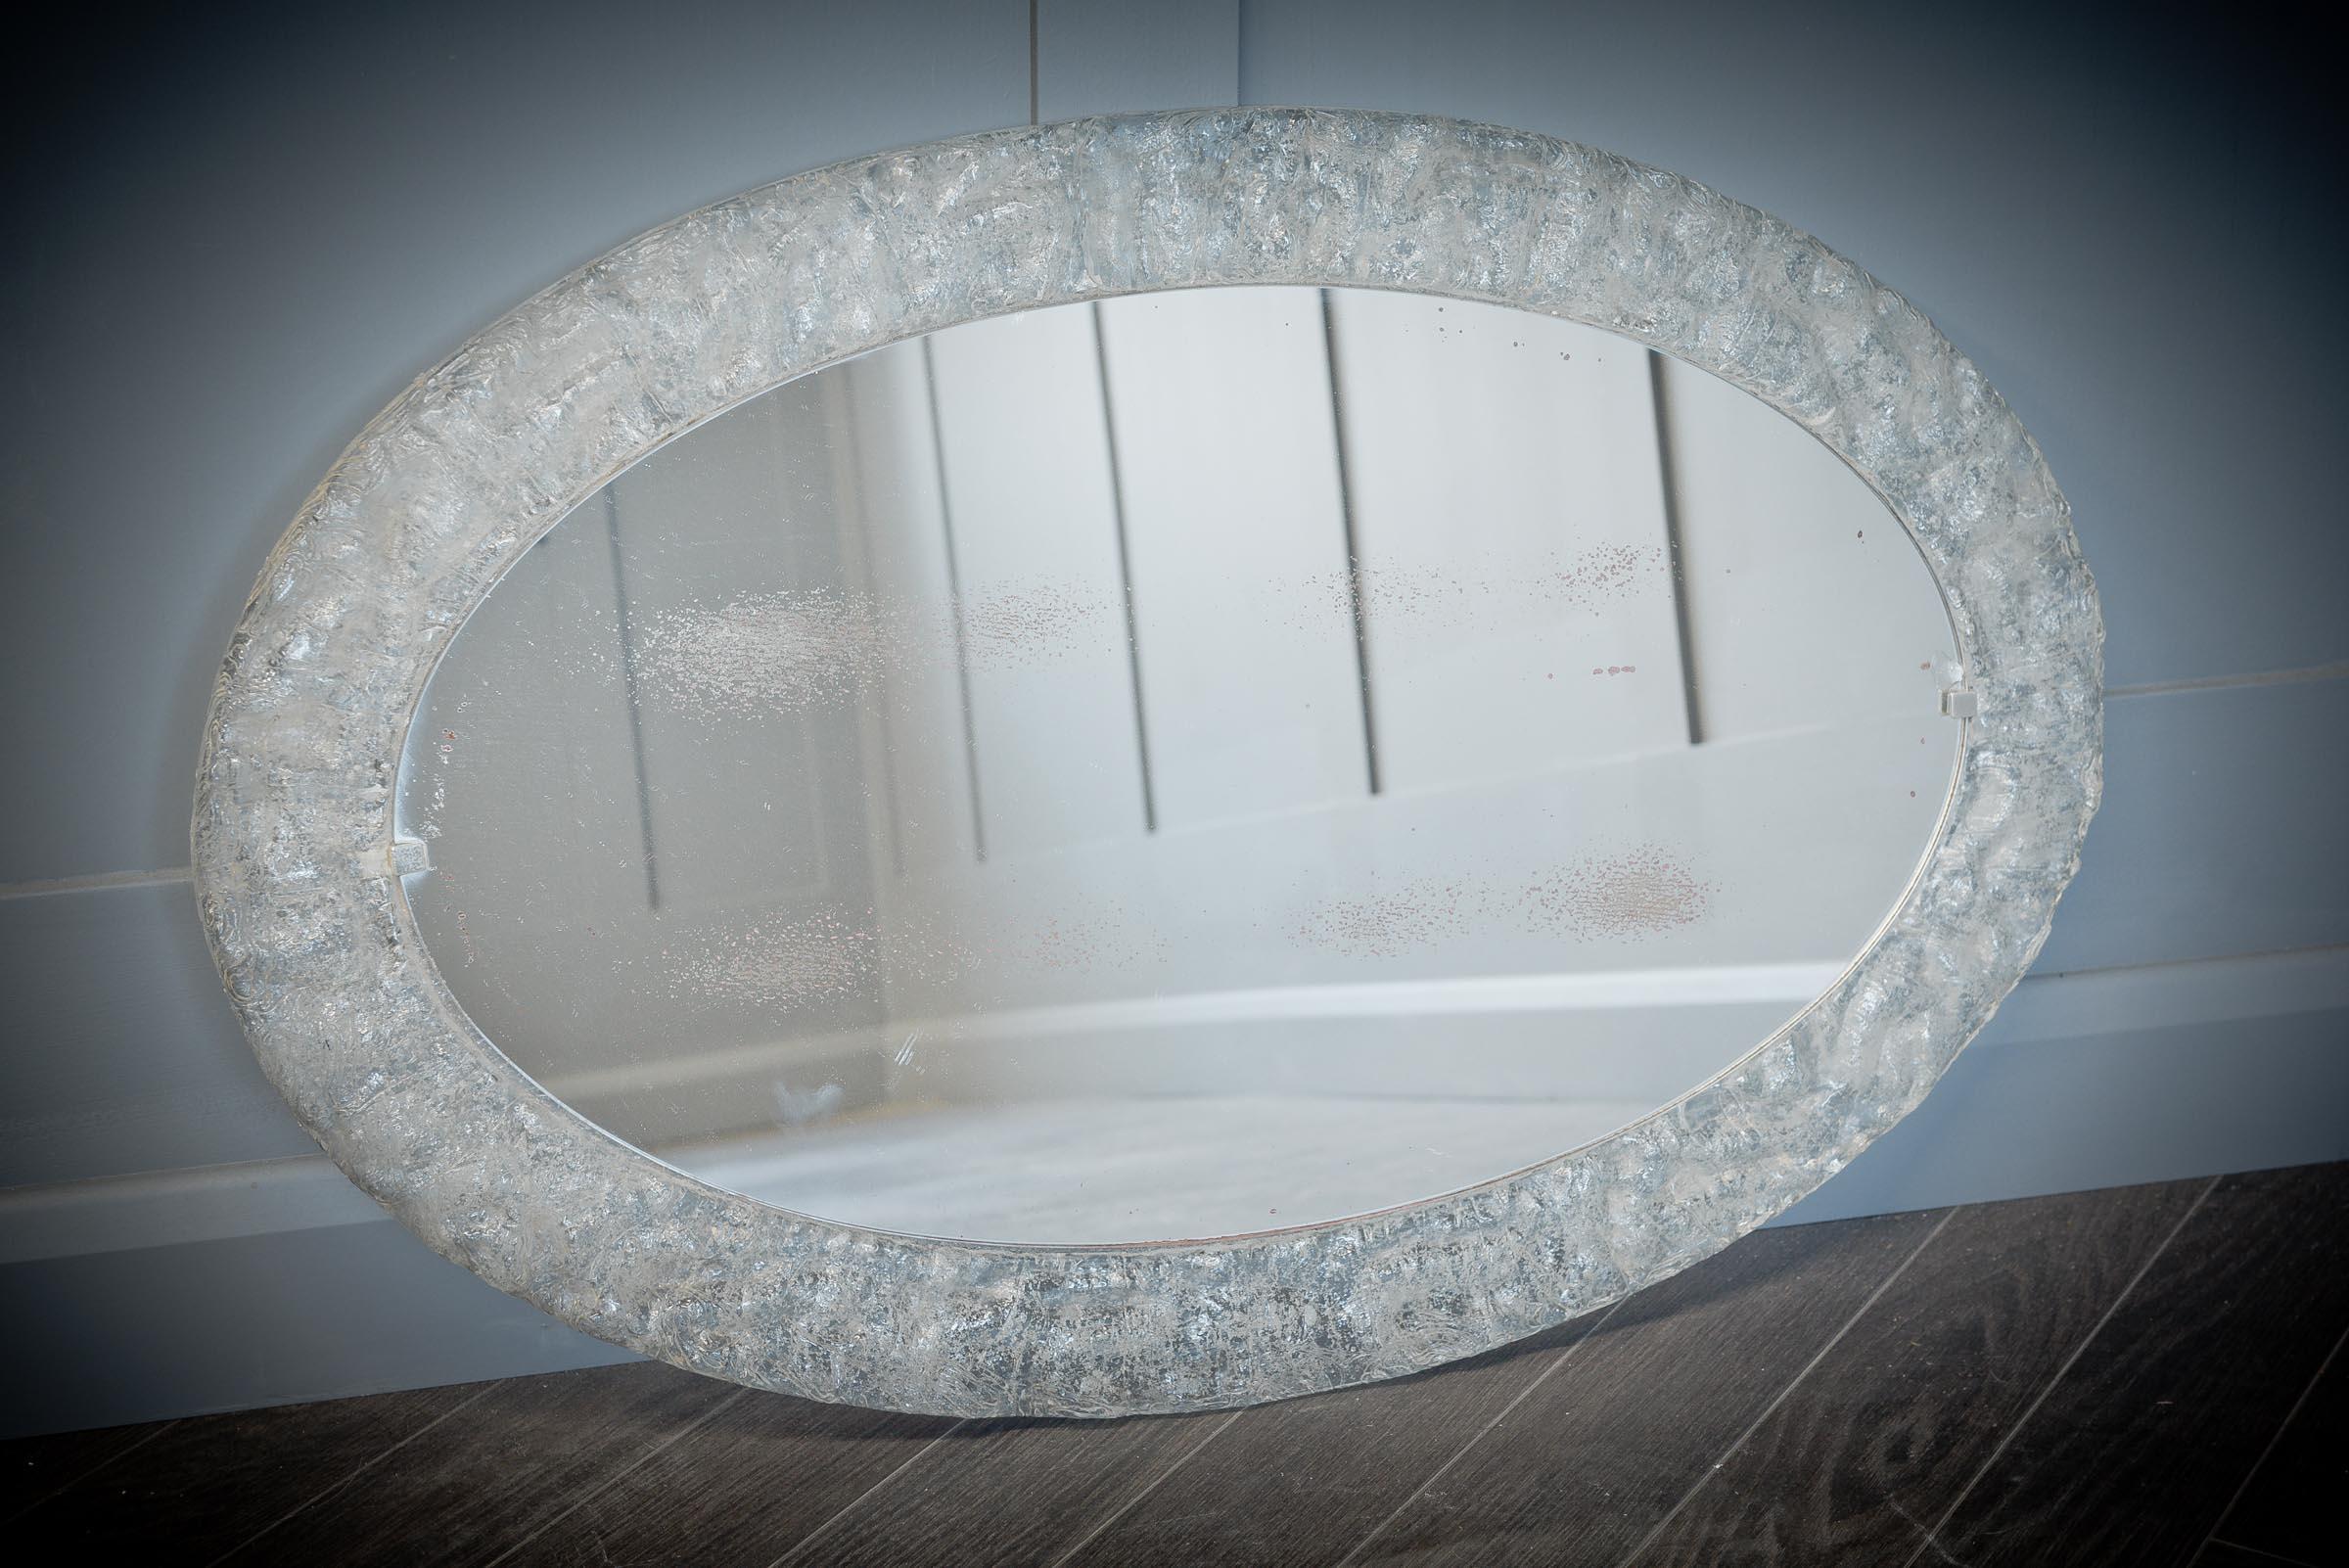 This stunning oval frosted glass mirror is typical of mid-century style and would look beautiful in a hall or above a dressing table.